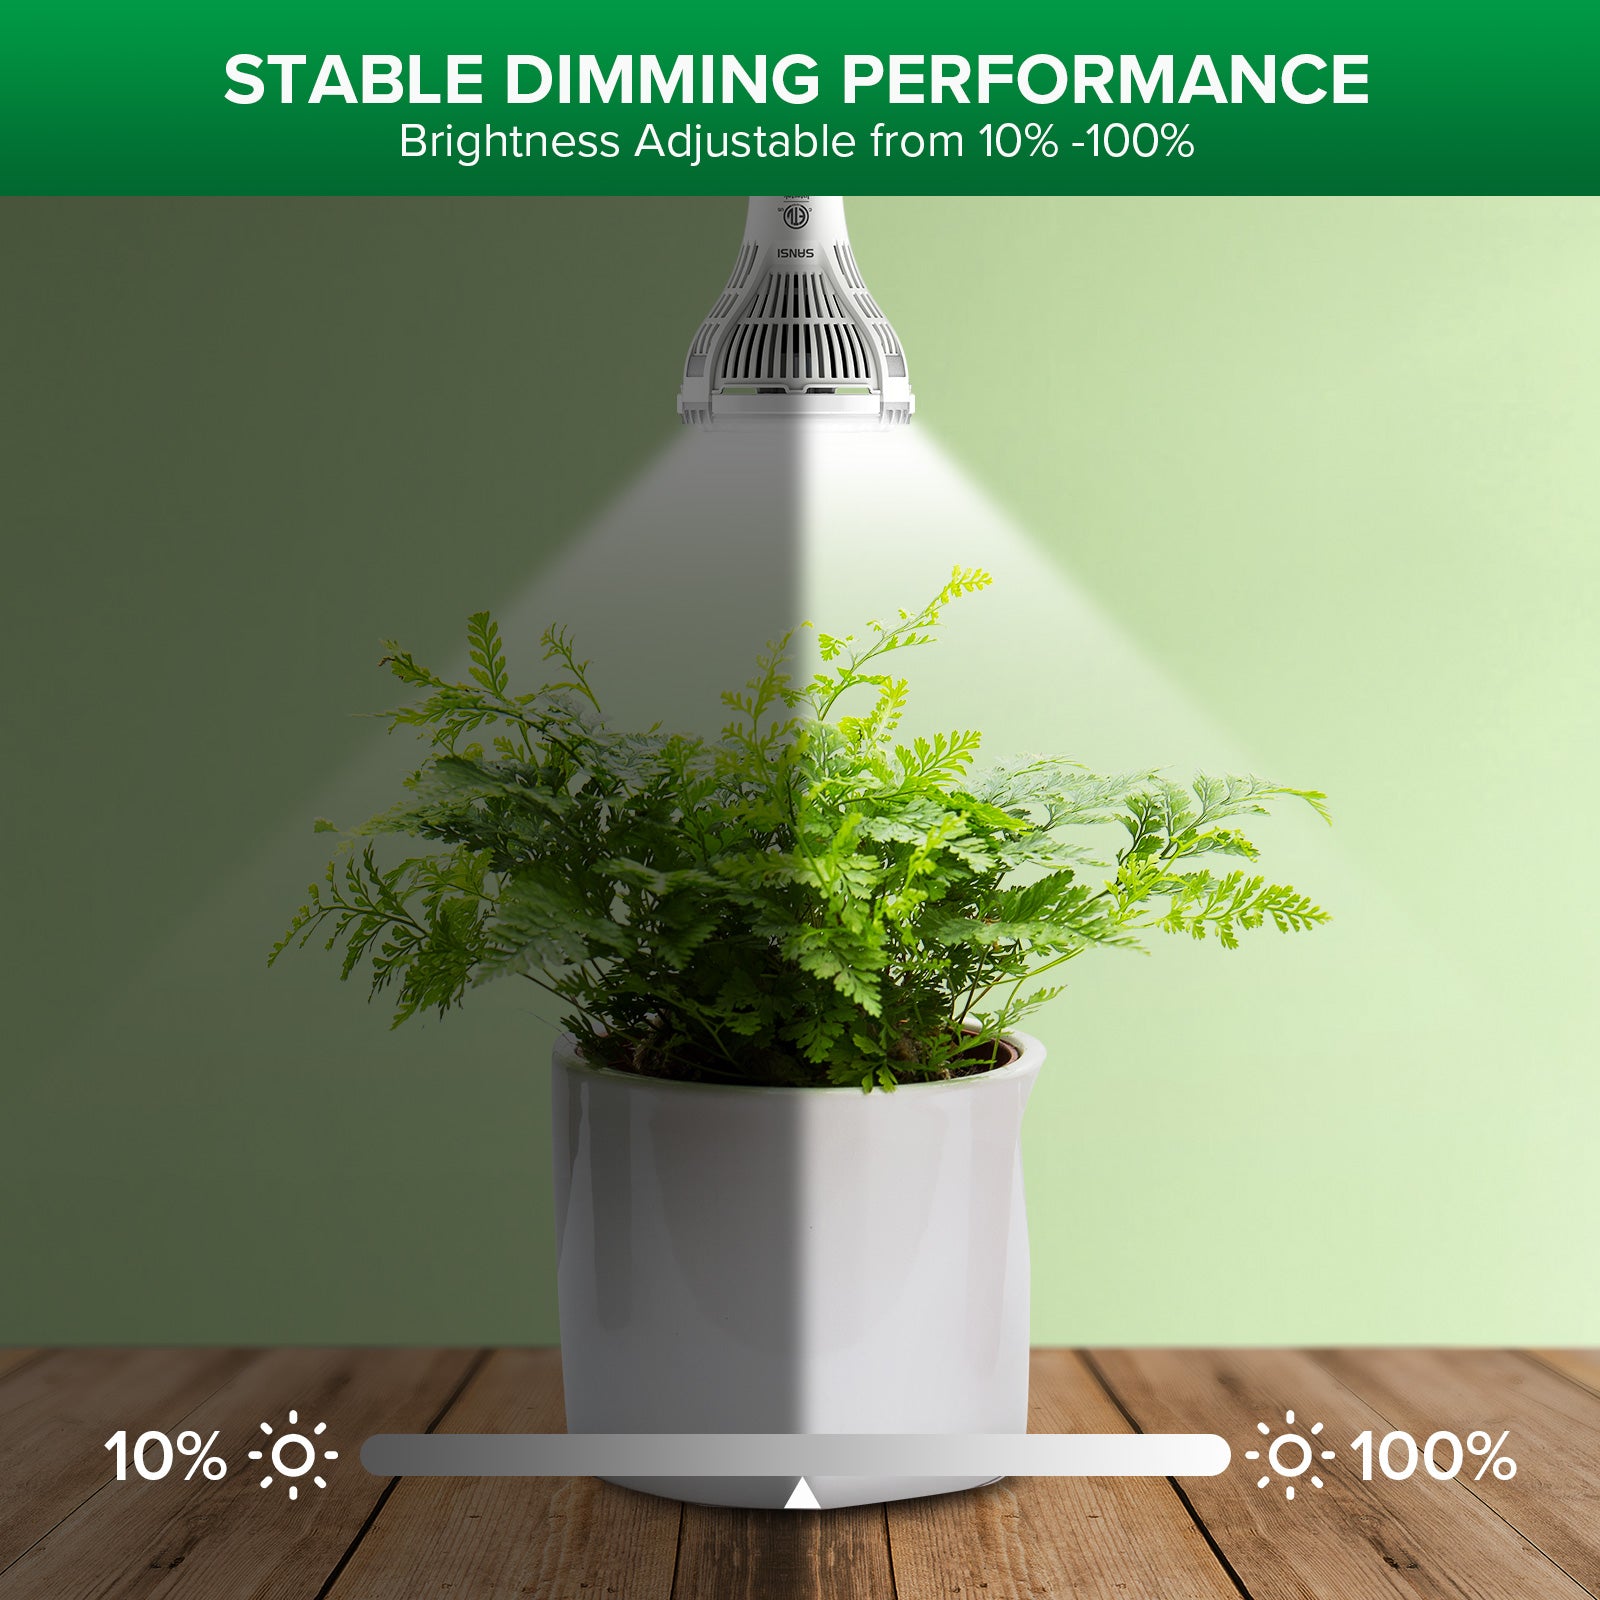 PAR25 10W Smart Grow Light Bulb with APP Control, stable dimming performance, brightness adjustable from 10%-100%